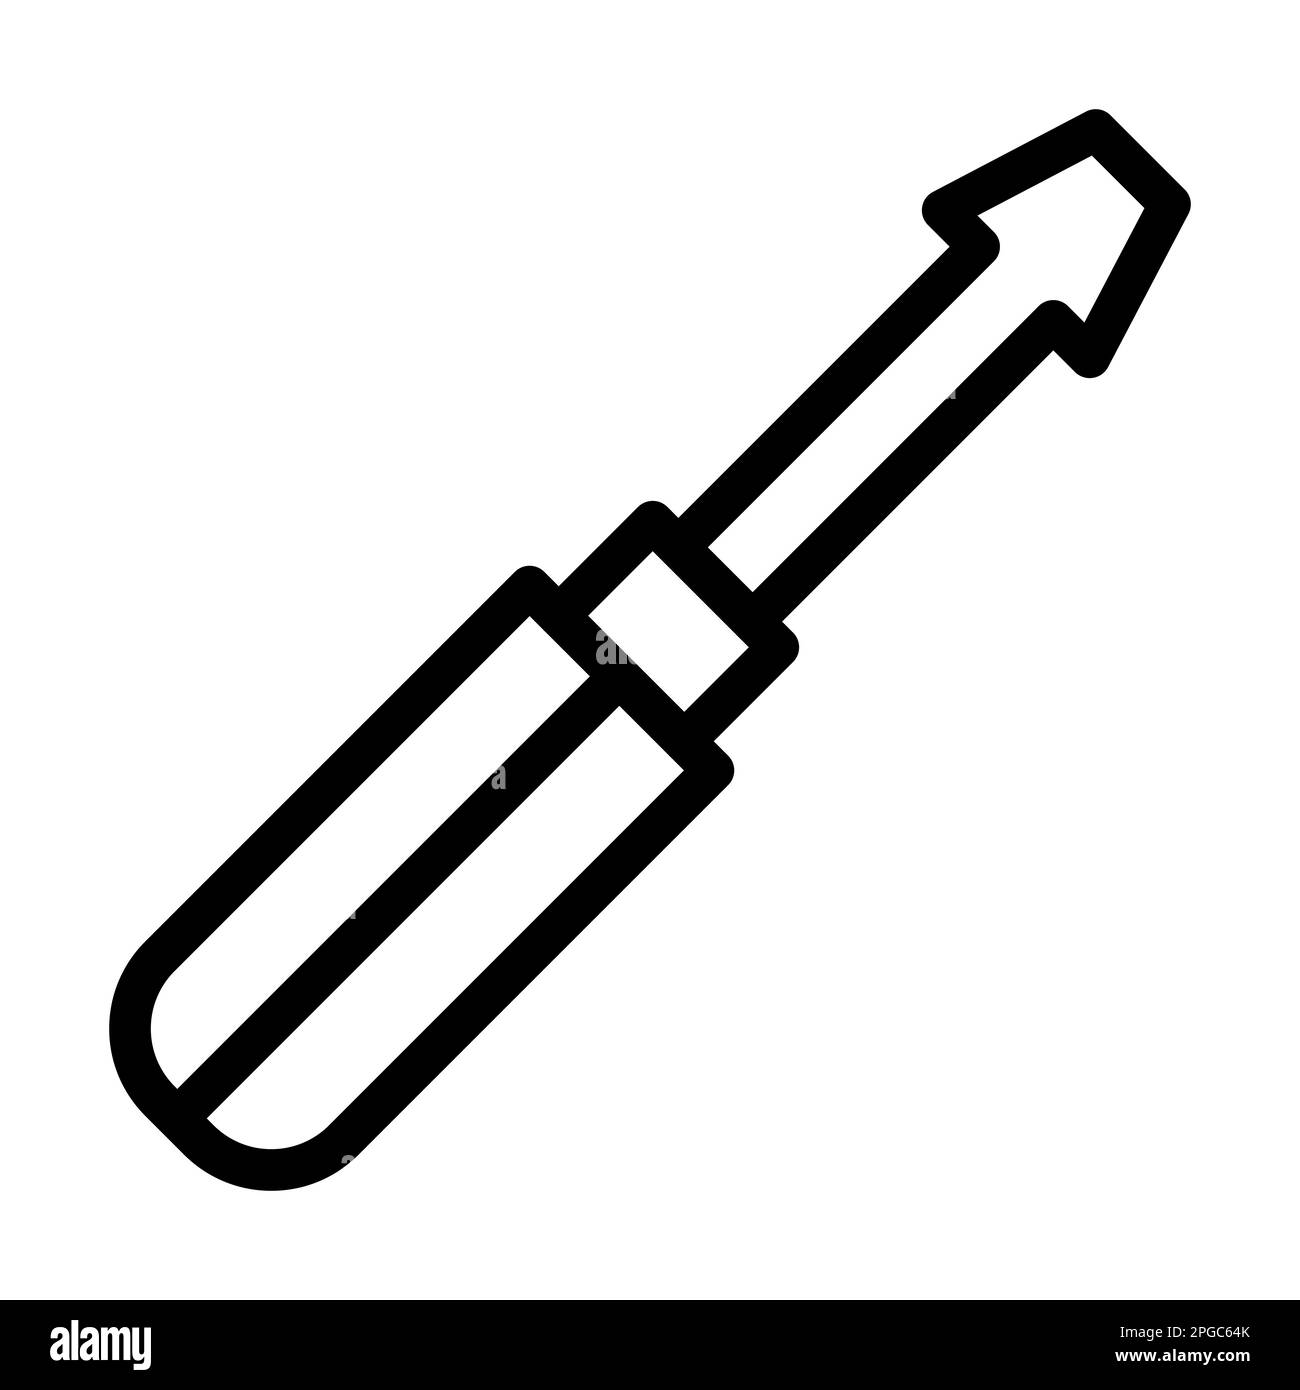 Screwdriver Vector Thick Line Icon For Personal And Commercial Use. Stock Photo